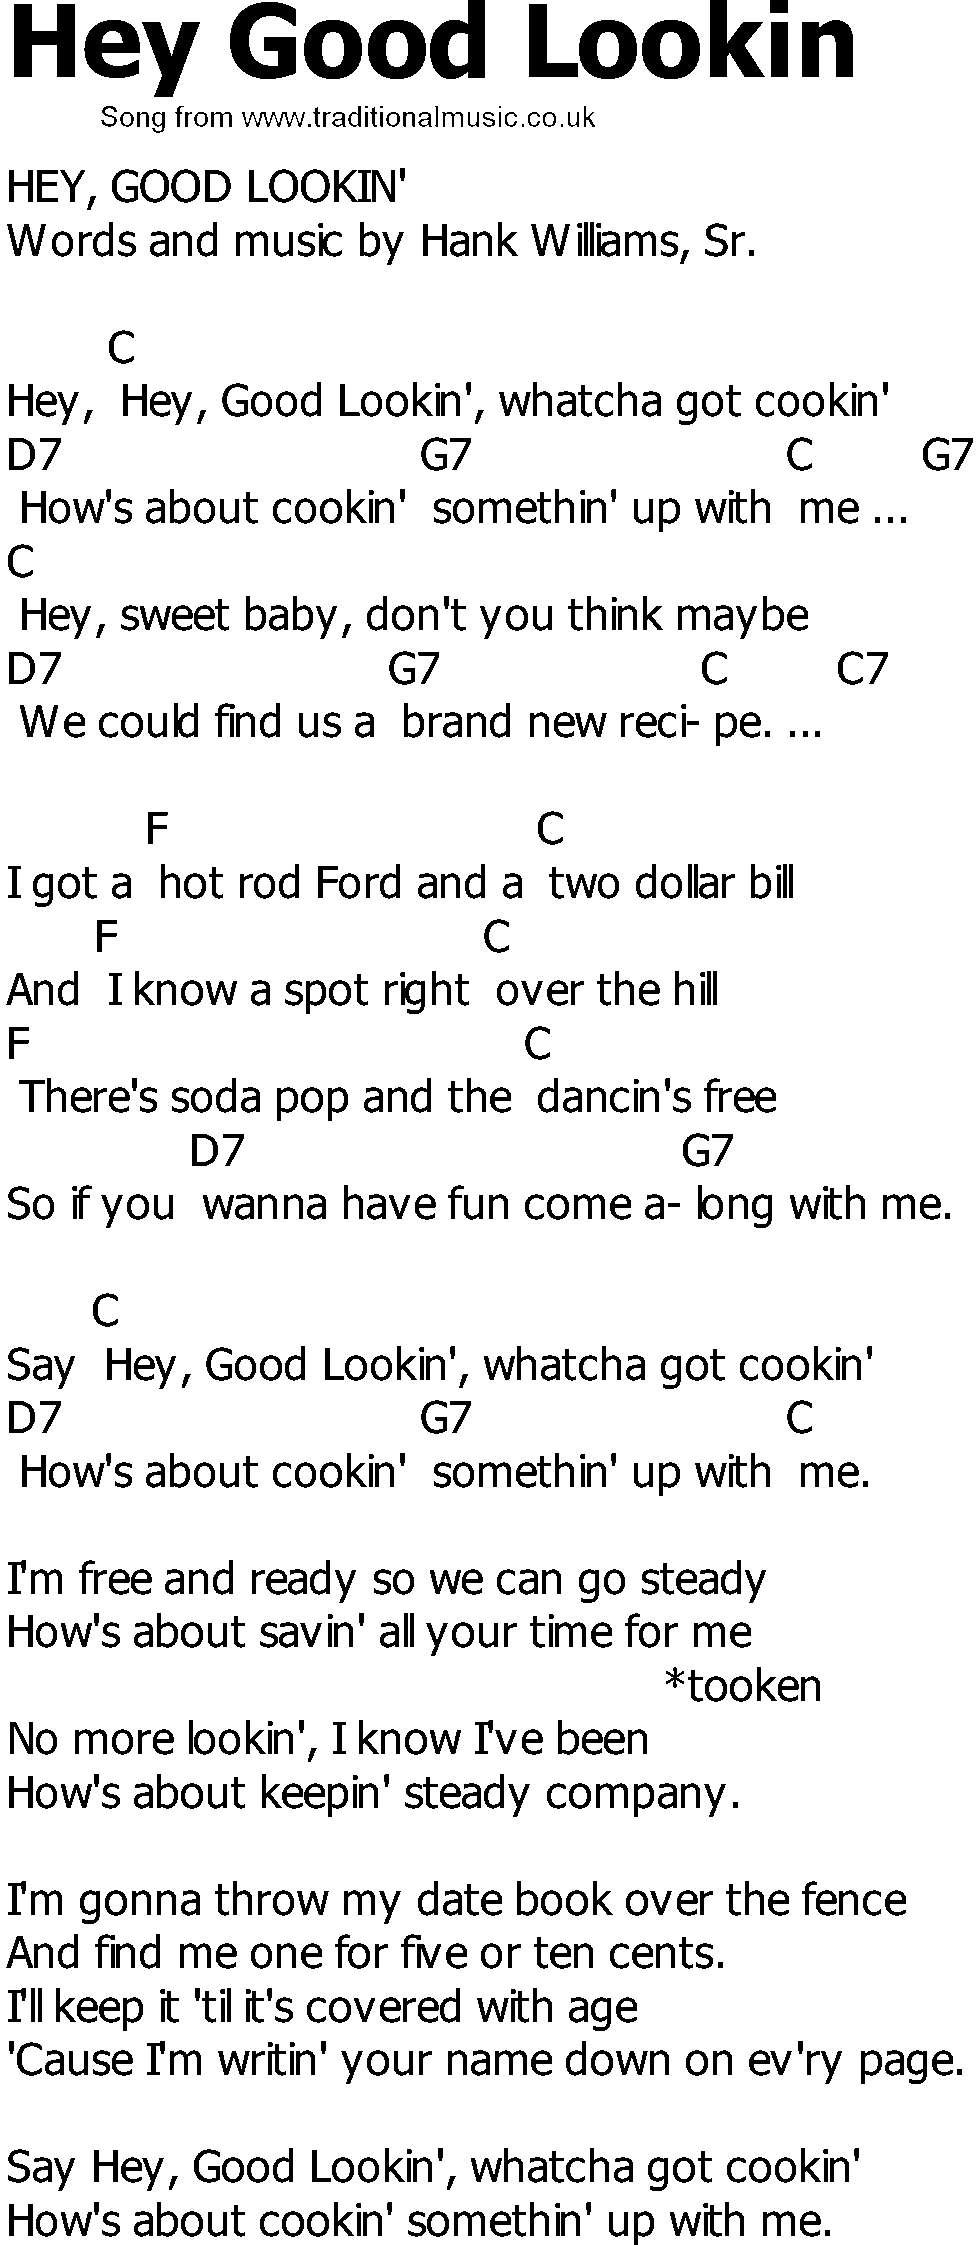 Old Country song lyrics with chords - Hey Good Lookin